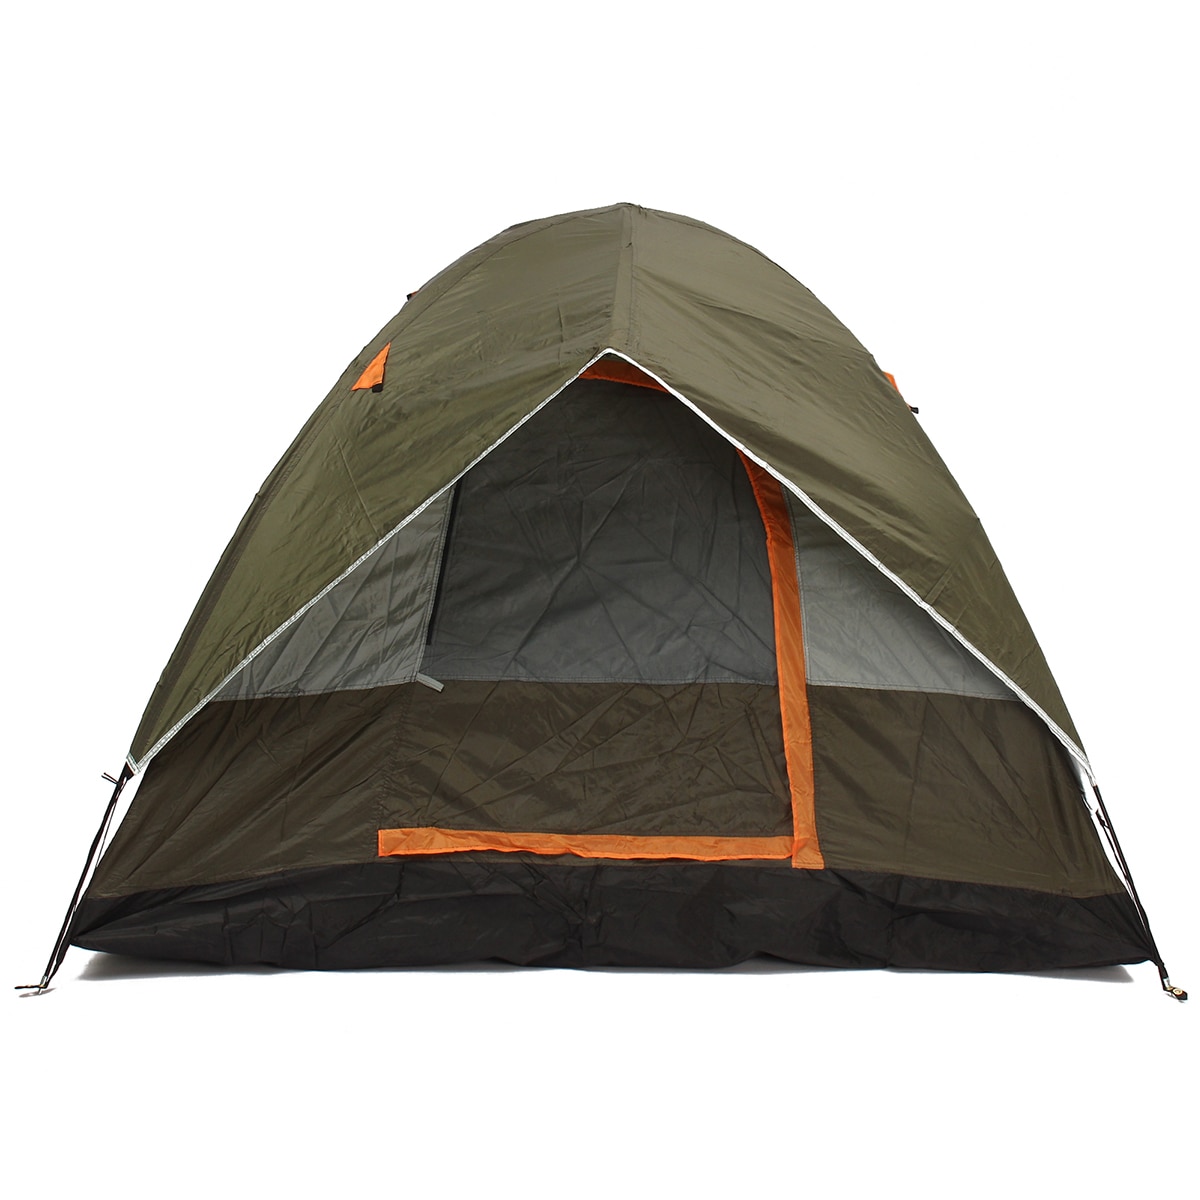 Waterproof Tent 4-Person Camping Shelter